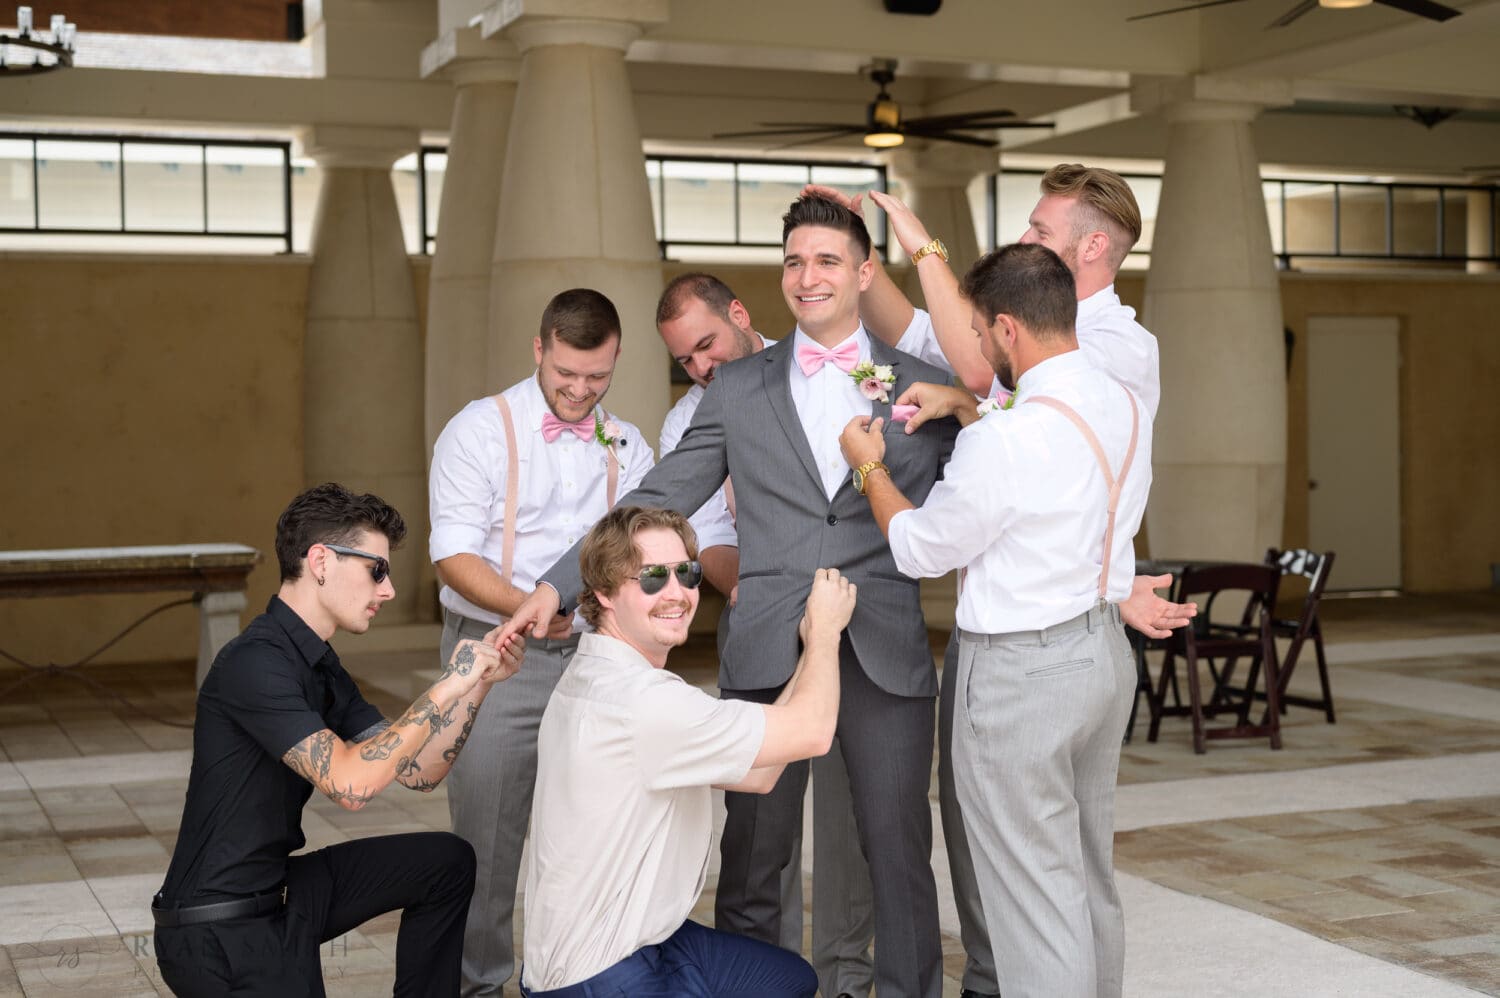 Groomsmen being crazy with the getting ready pictures - 21 Main Events at North Beach